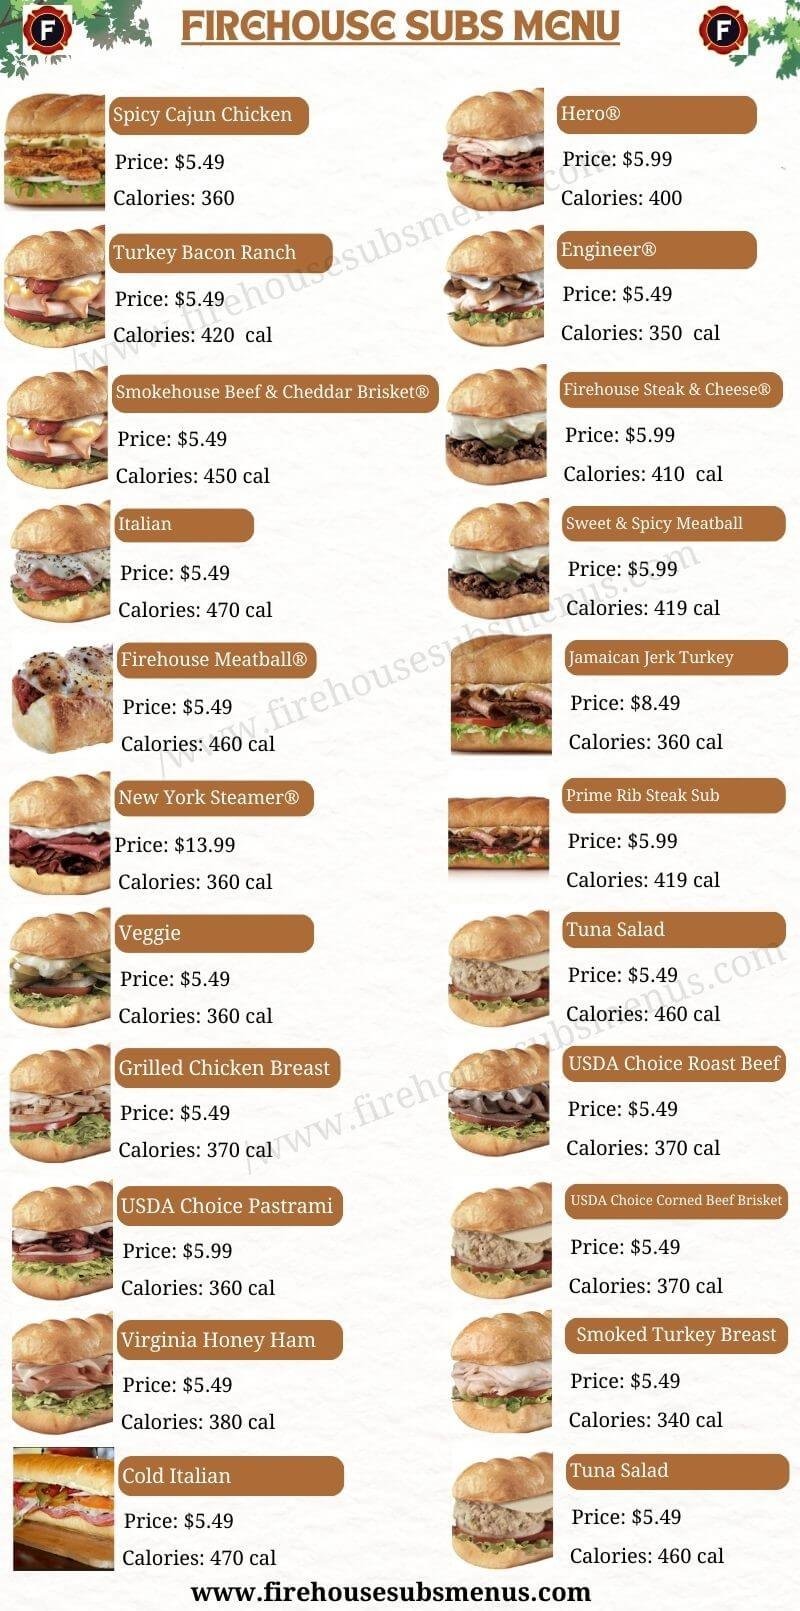 Explore Firehouse Subs Menu With Prices And Pictures!